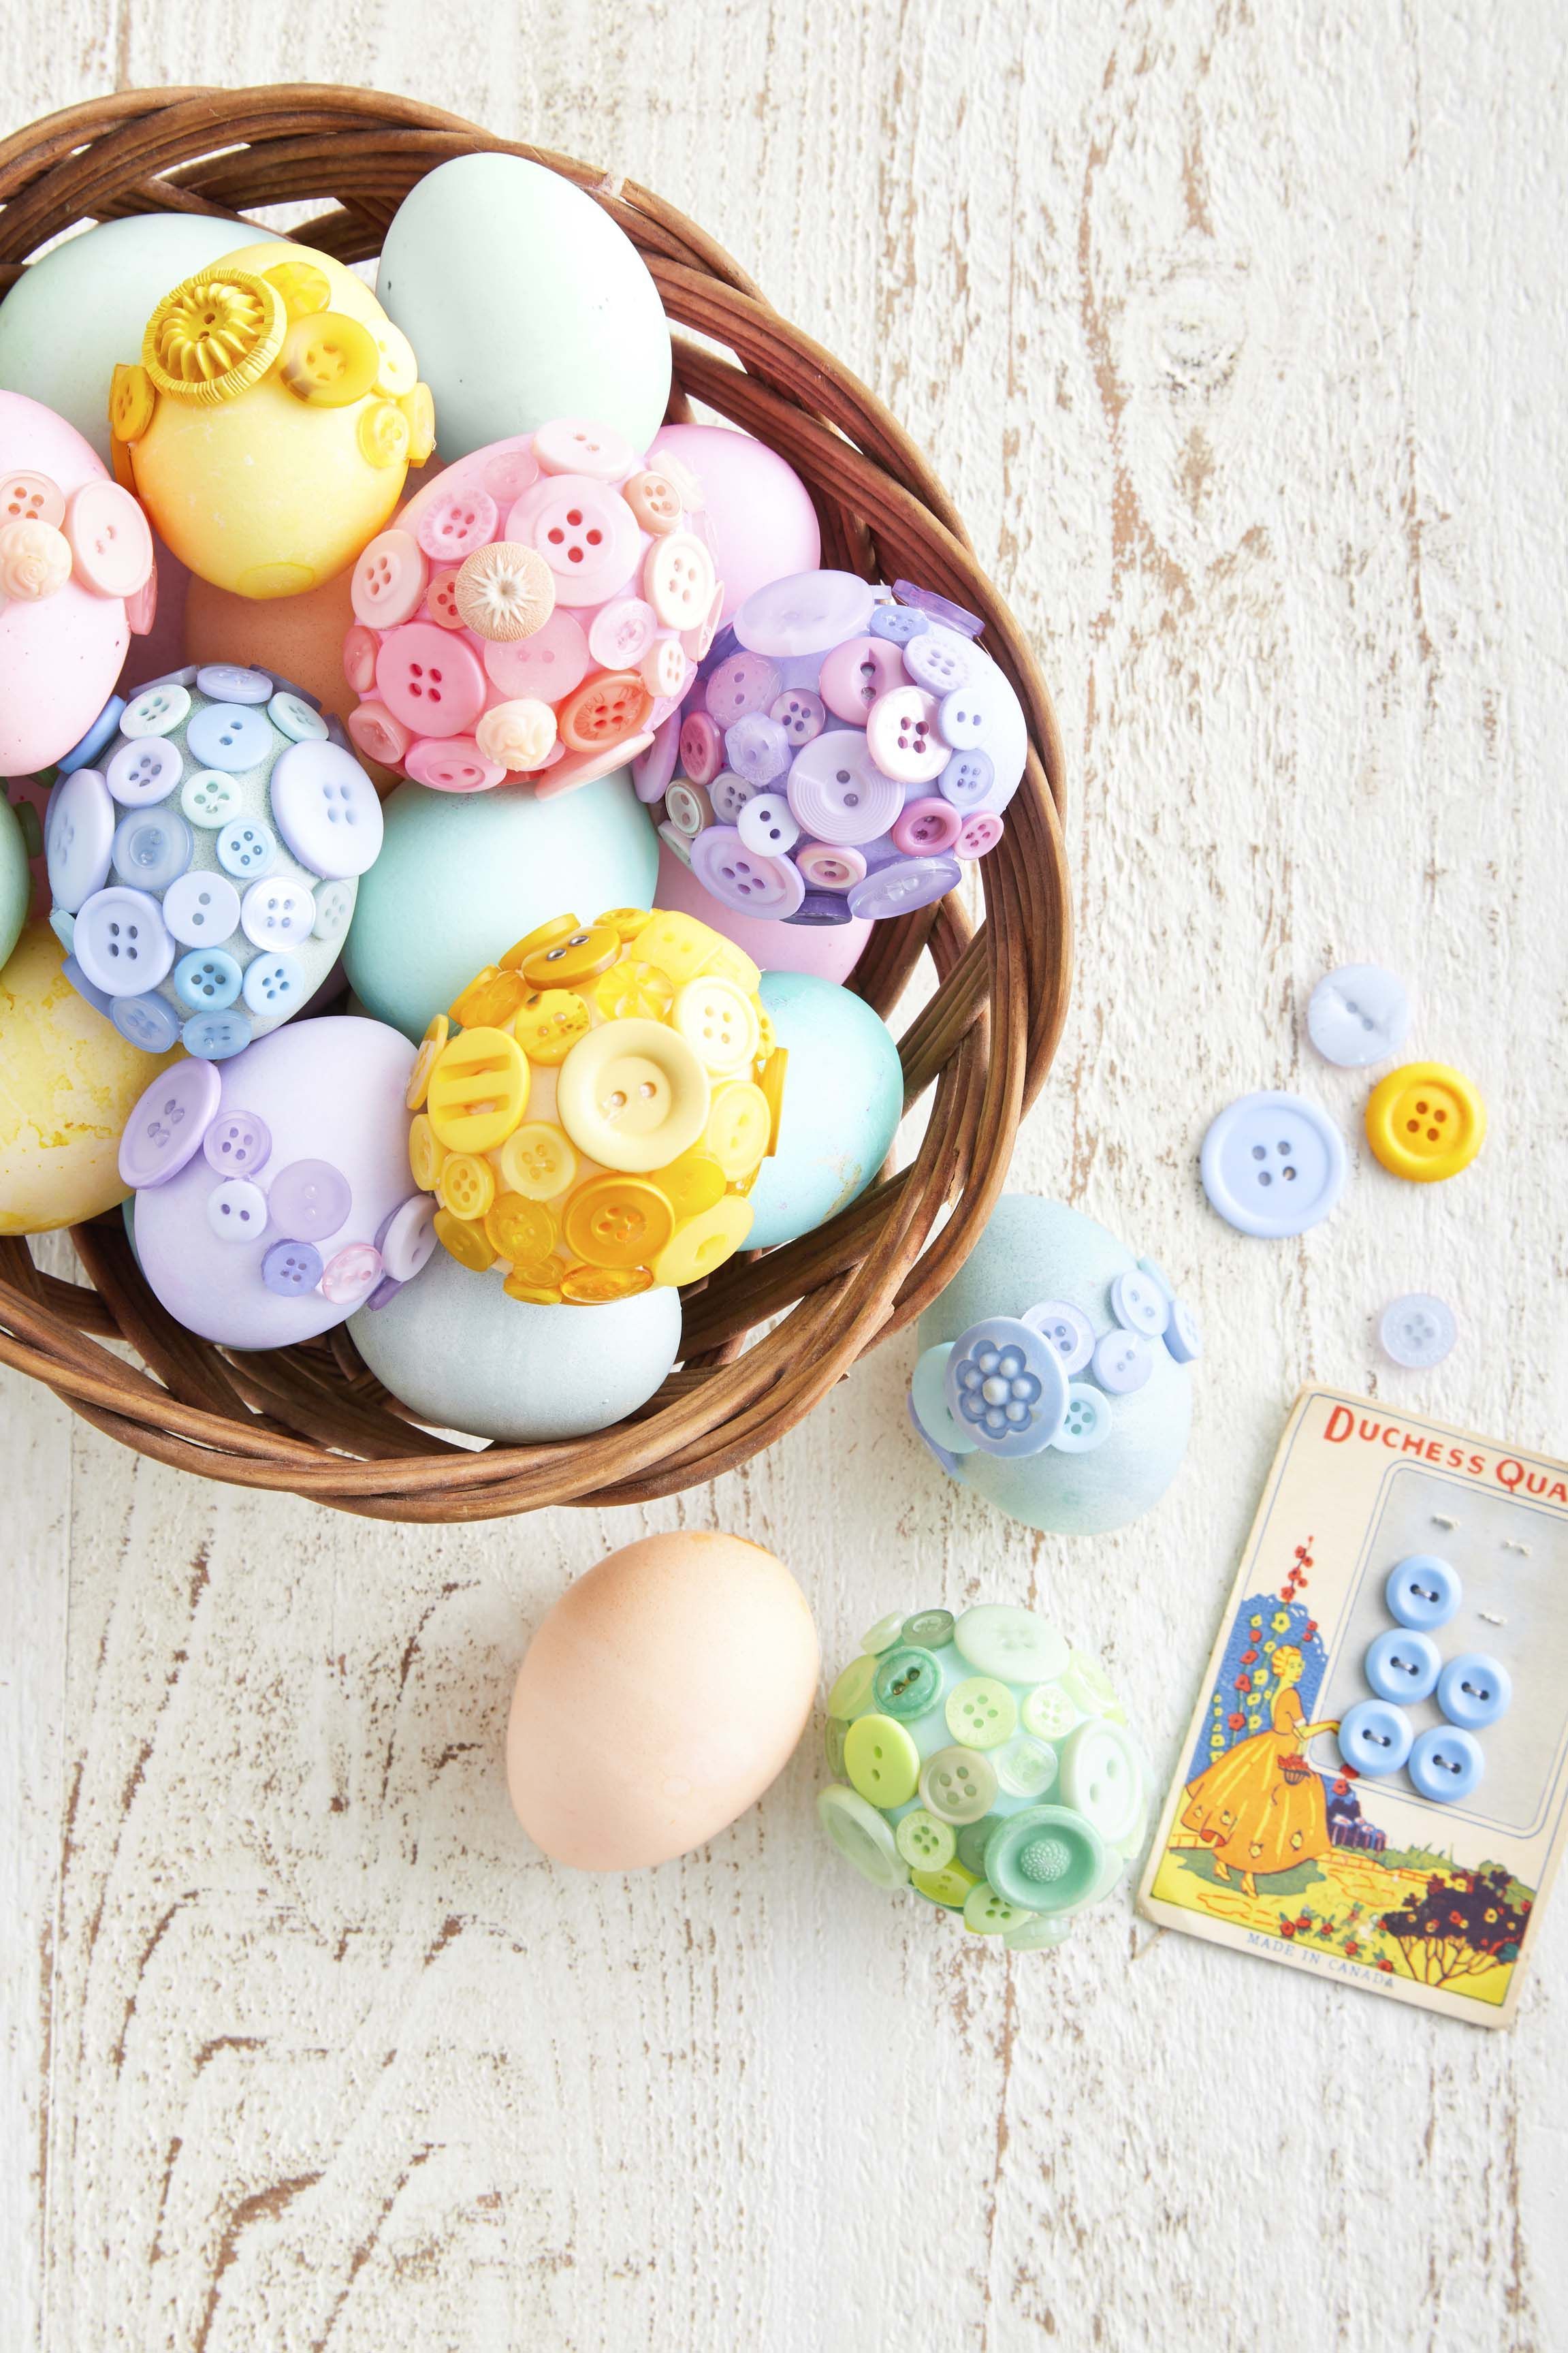 24 Best Easter Egg Painting Ideas — Easy Easter Egg Painting Techniques